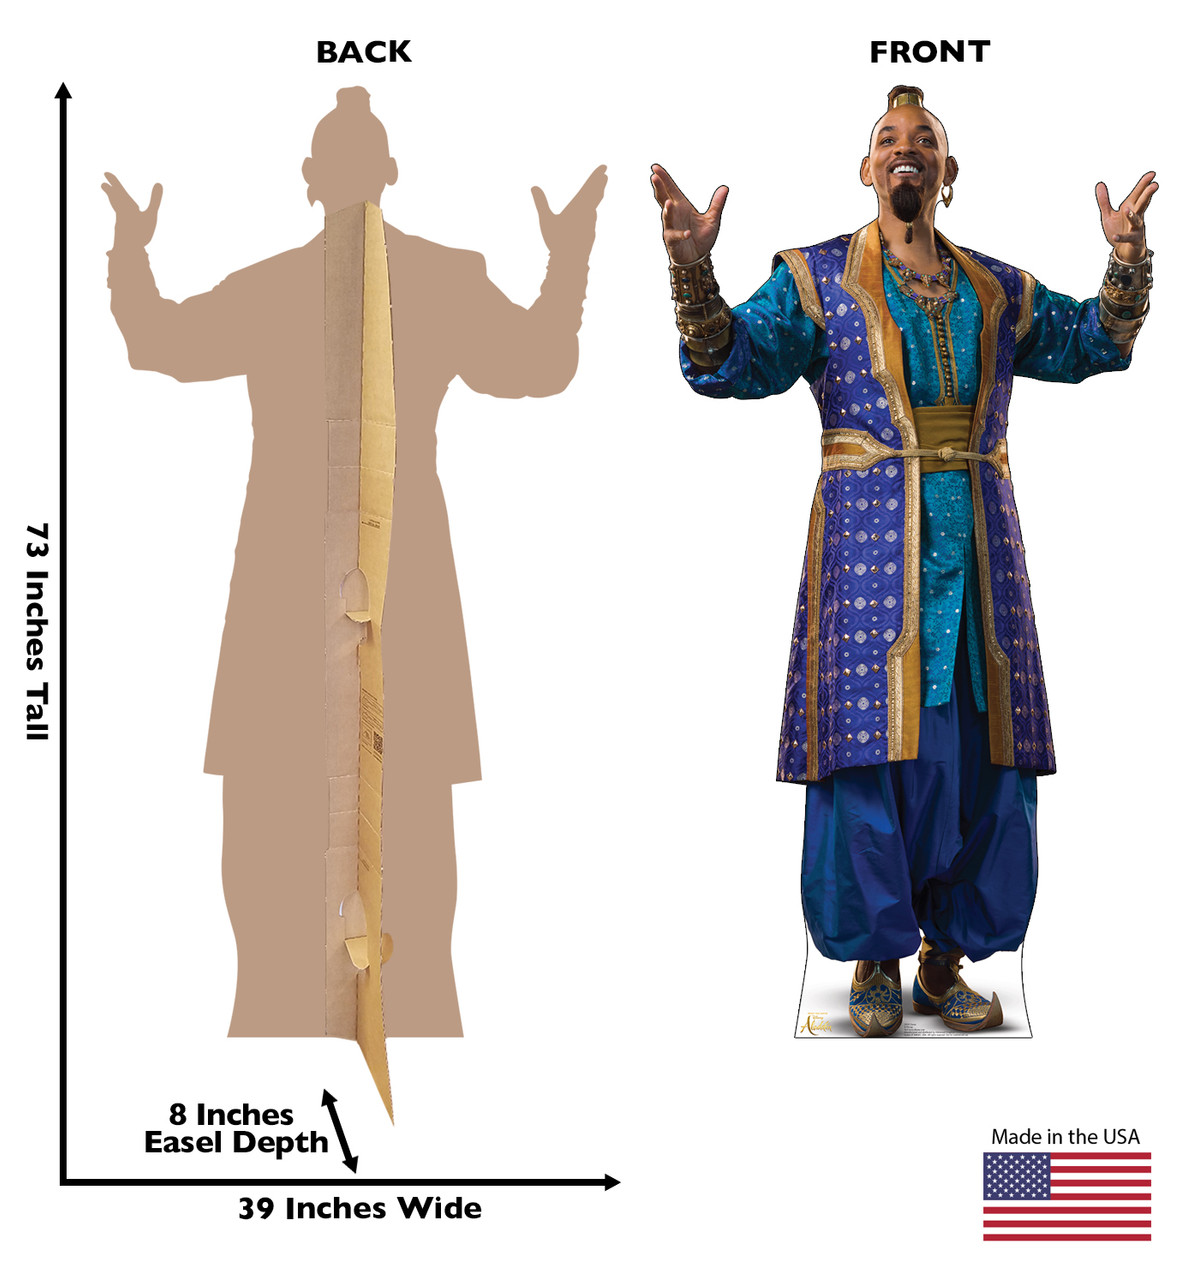 Life-size cardboard standee of Genie from the Disney live action Aladdin movie with front and back dimensions.